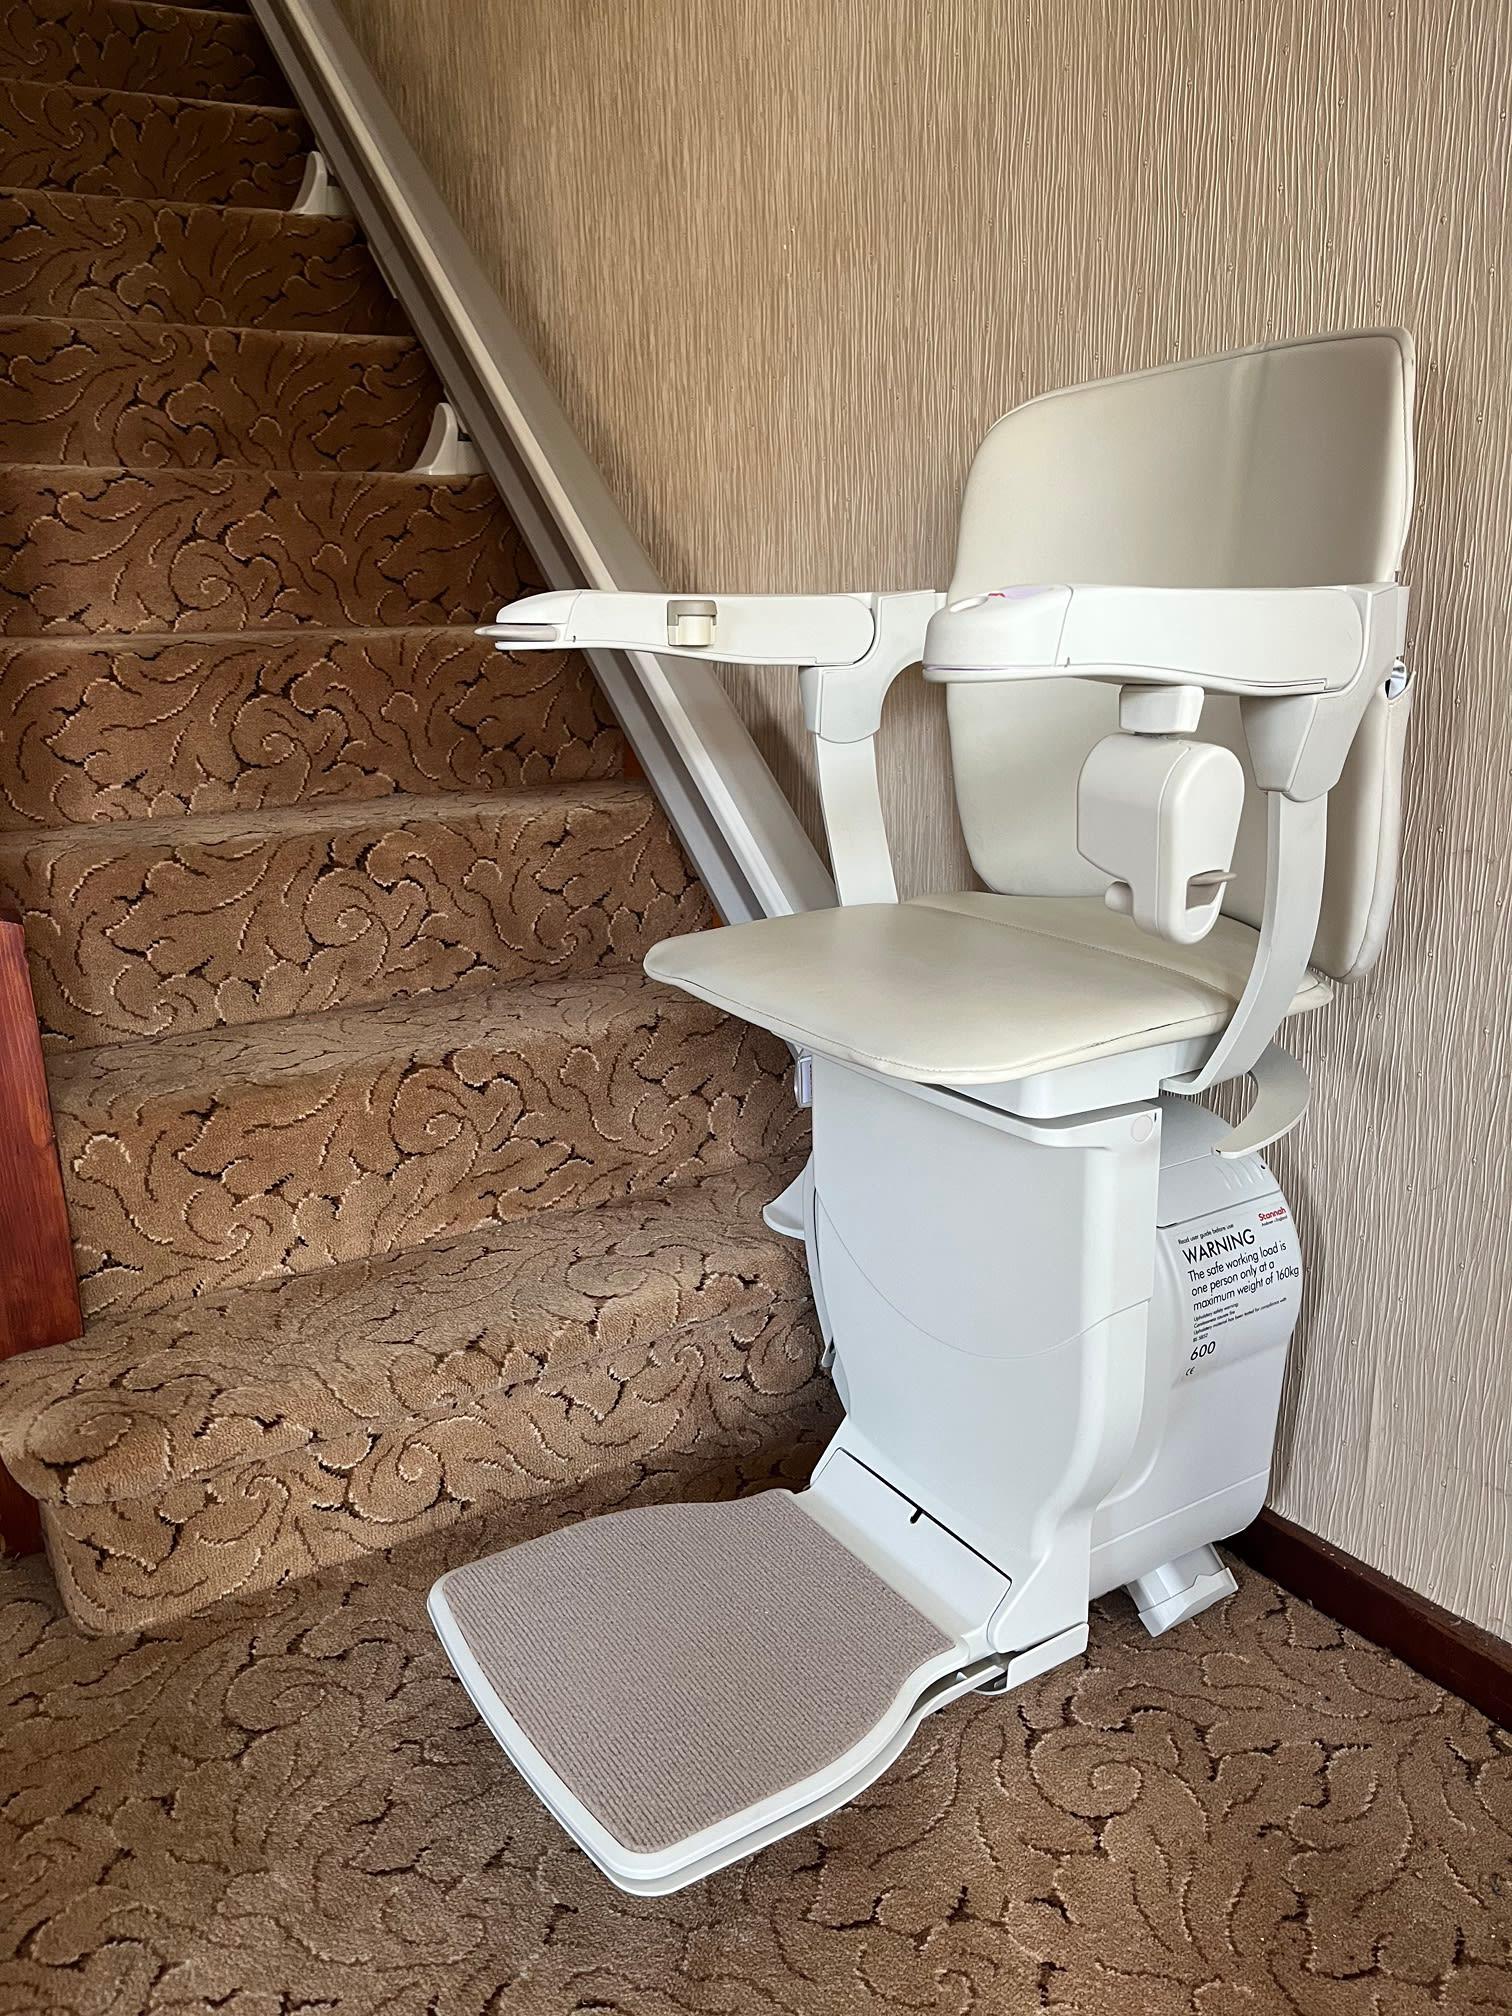 Images Superglide Stairlifts